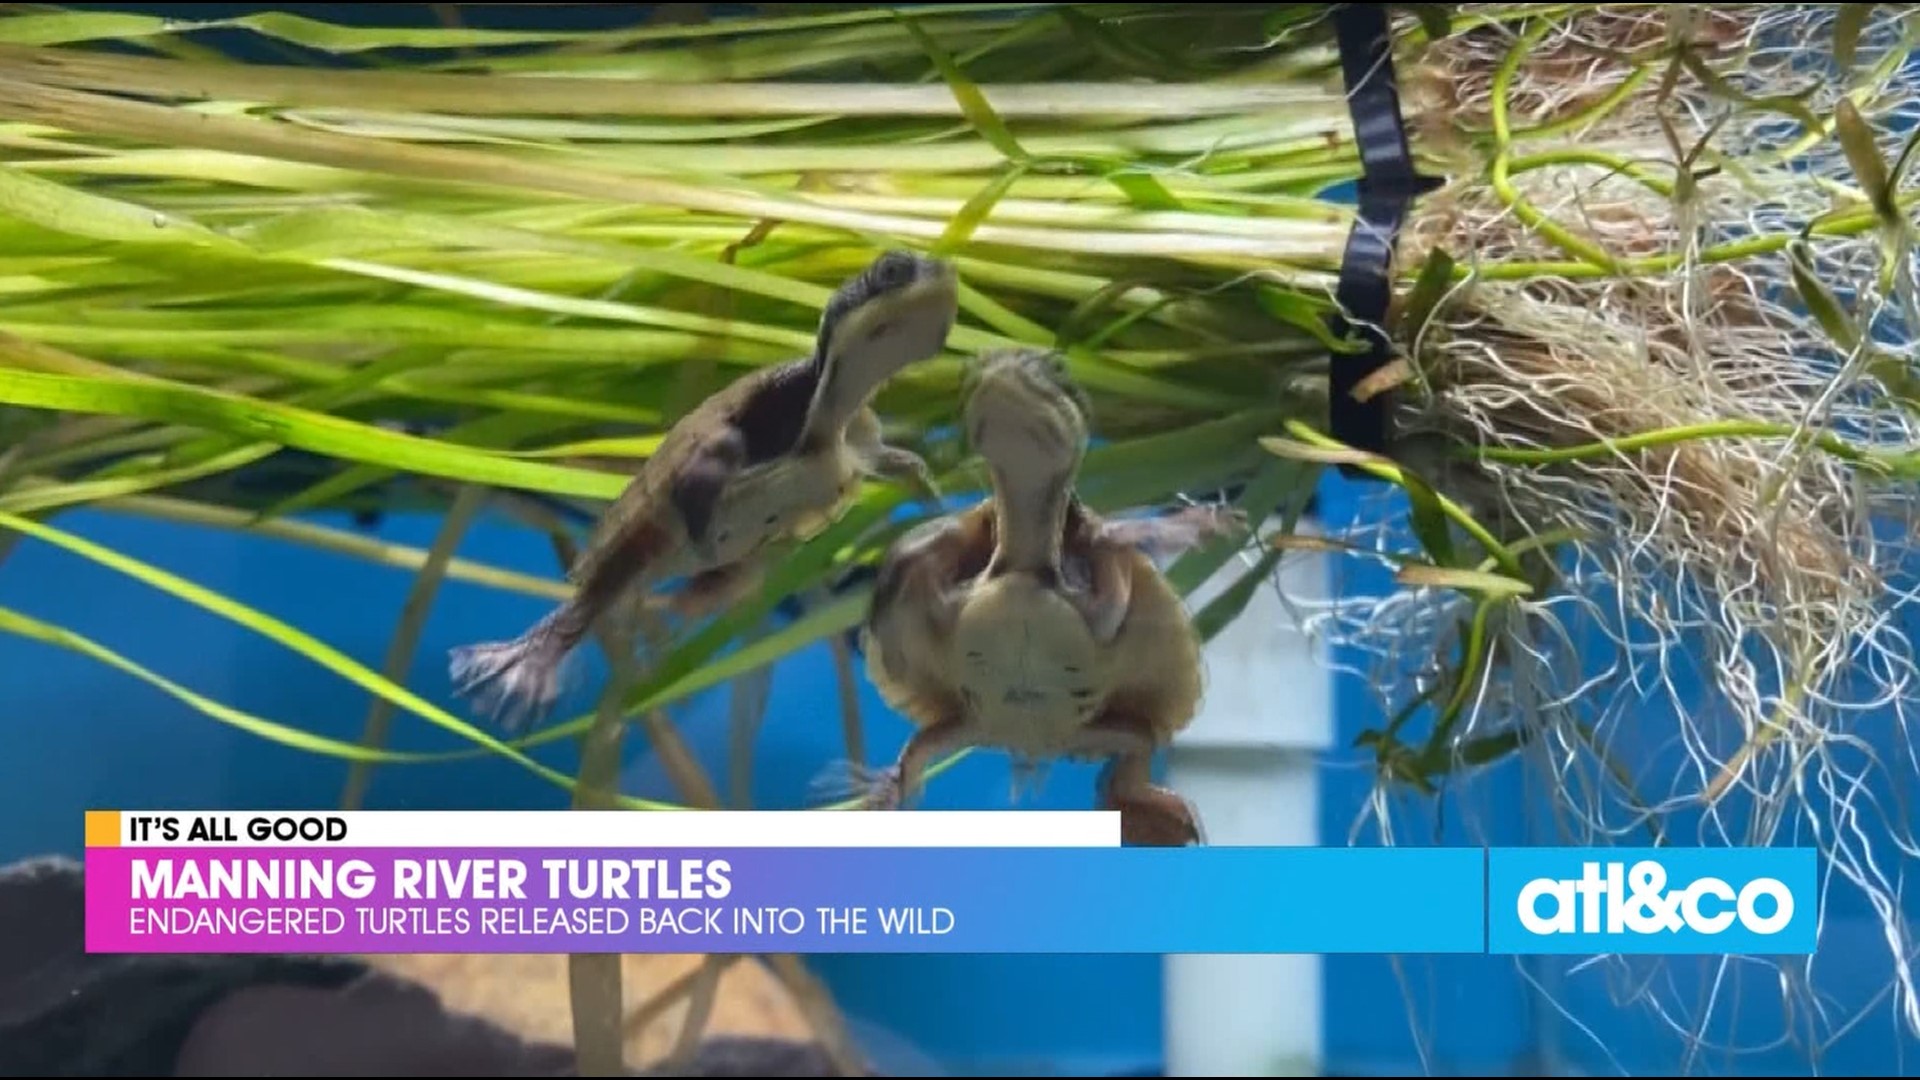 Australian conservationists released 10 juvenile turtles into the wild, which they had saved during the 2020 bushfires.